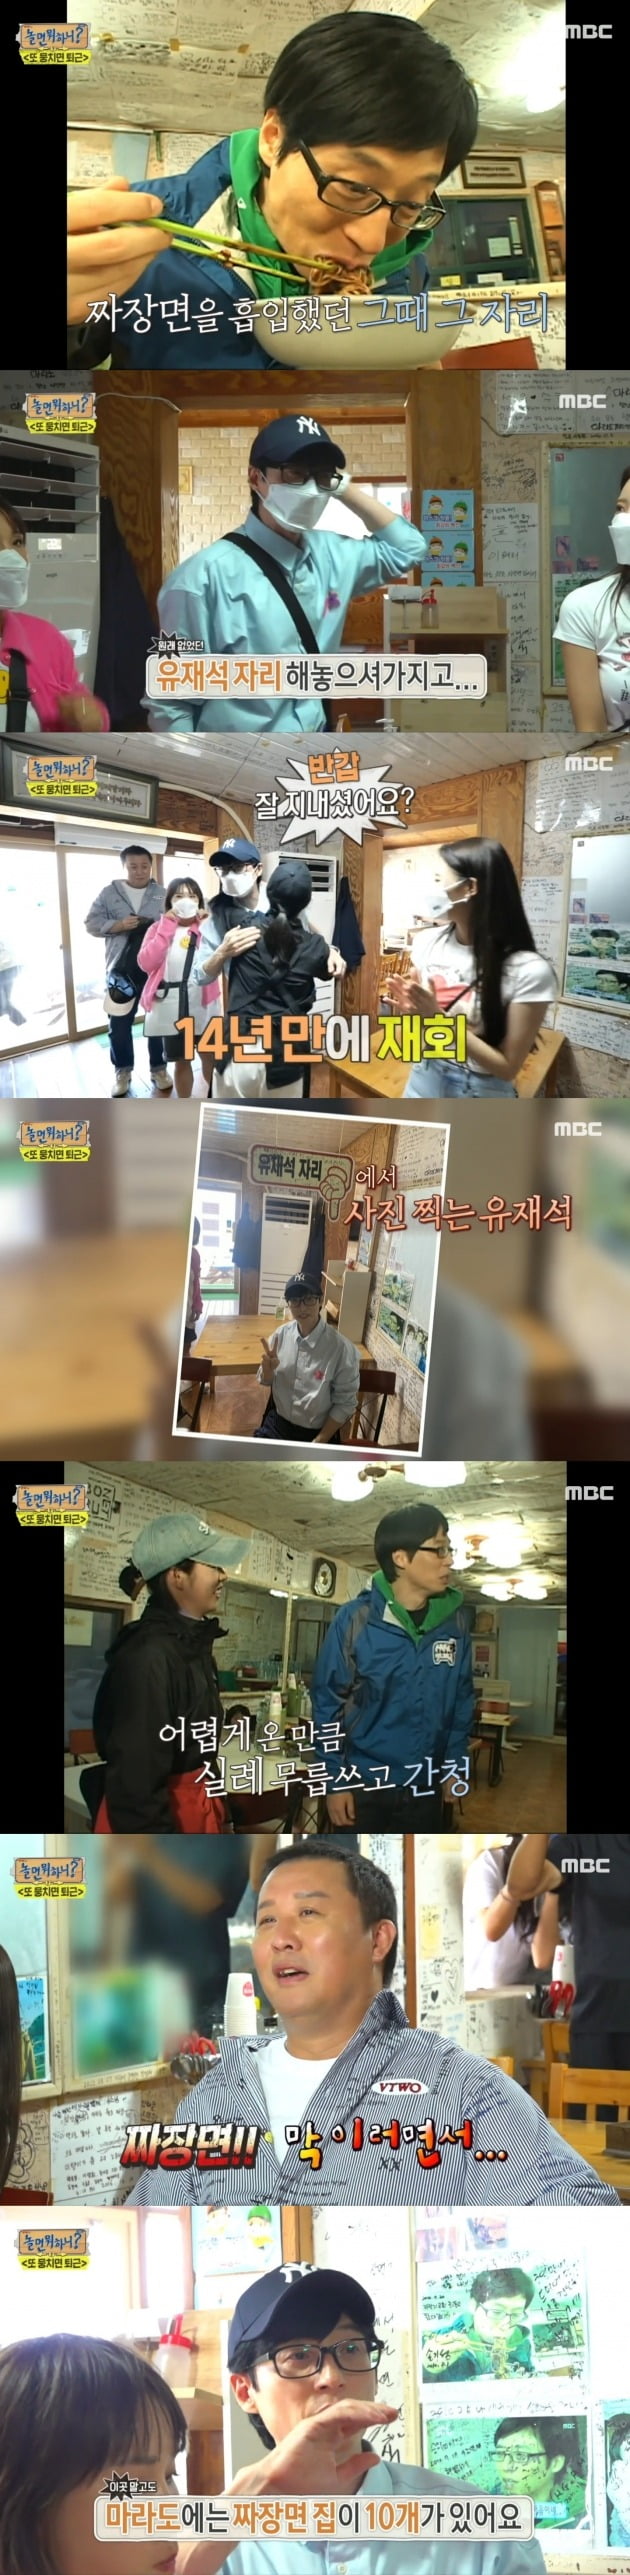 Fourteen years ago memories moistened Glenunga on broadcaster Yoo Jae-Suk.In MBC Hangout with Yoo broadcasted on the 24th, the members who are going to work union got on the air.On this day, Yoo Jae-Suk found a store led by the production team.The identity of the store was Jajangmyeon house, which was visited during the filming of Infinite Challenge in the past. Yoo Jae-Suk was happy to see Oh, I found this place in 14 years with a bright face.Yoo Jae-Suk looked at the boss and said, Oh, you are the boss at the time? How are you? You said Yoo Jae-Suk seat there.He said, I looked around and the store changed a little. He also smiled at the Noh Hong-chul, Jeong Hyeong-don spot next to the Yoo Jae-Suk spot.Yoo Jae-Suk, who sat down, said, So, can you give me Jajangmyeon for now? The members are curious.The kid I saw on the air is now with my senior, and at that time, he closed it all and came here, the Americas said.I had no place to open up here, Yoo Jae-Suk recalled, I remember going to the boss and saying, Can I come in here?Jung Jun-ha looked at the Jeong Hyeong-don seat and said, I was really annoyed at that spot.Yoo Jae-Suk also reunited the shop boss daughter, who, when she visited the store, became a four-year-old girl who became a 17-year-old lady; Yoo Jae-Suk said, Its a real pleasure.I suddenly came to the program, he said, surprised and glad.Later, Jajangmyeon came out; Yoo Jae-Suk recited, Yes, this is seafood and it came out; Im only going to try this again.Yoo Jae-Suk, who ate Jajangmyeon with a big mouth, said, Sometimes I remembered this Jajangmyeon.Yoo Jae-Suk continued to mention delicious; he also explained to members that in fact, there are about 10 Jajangmyeon houses in Marado; each house has its own characteristics.